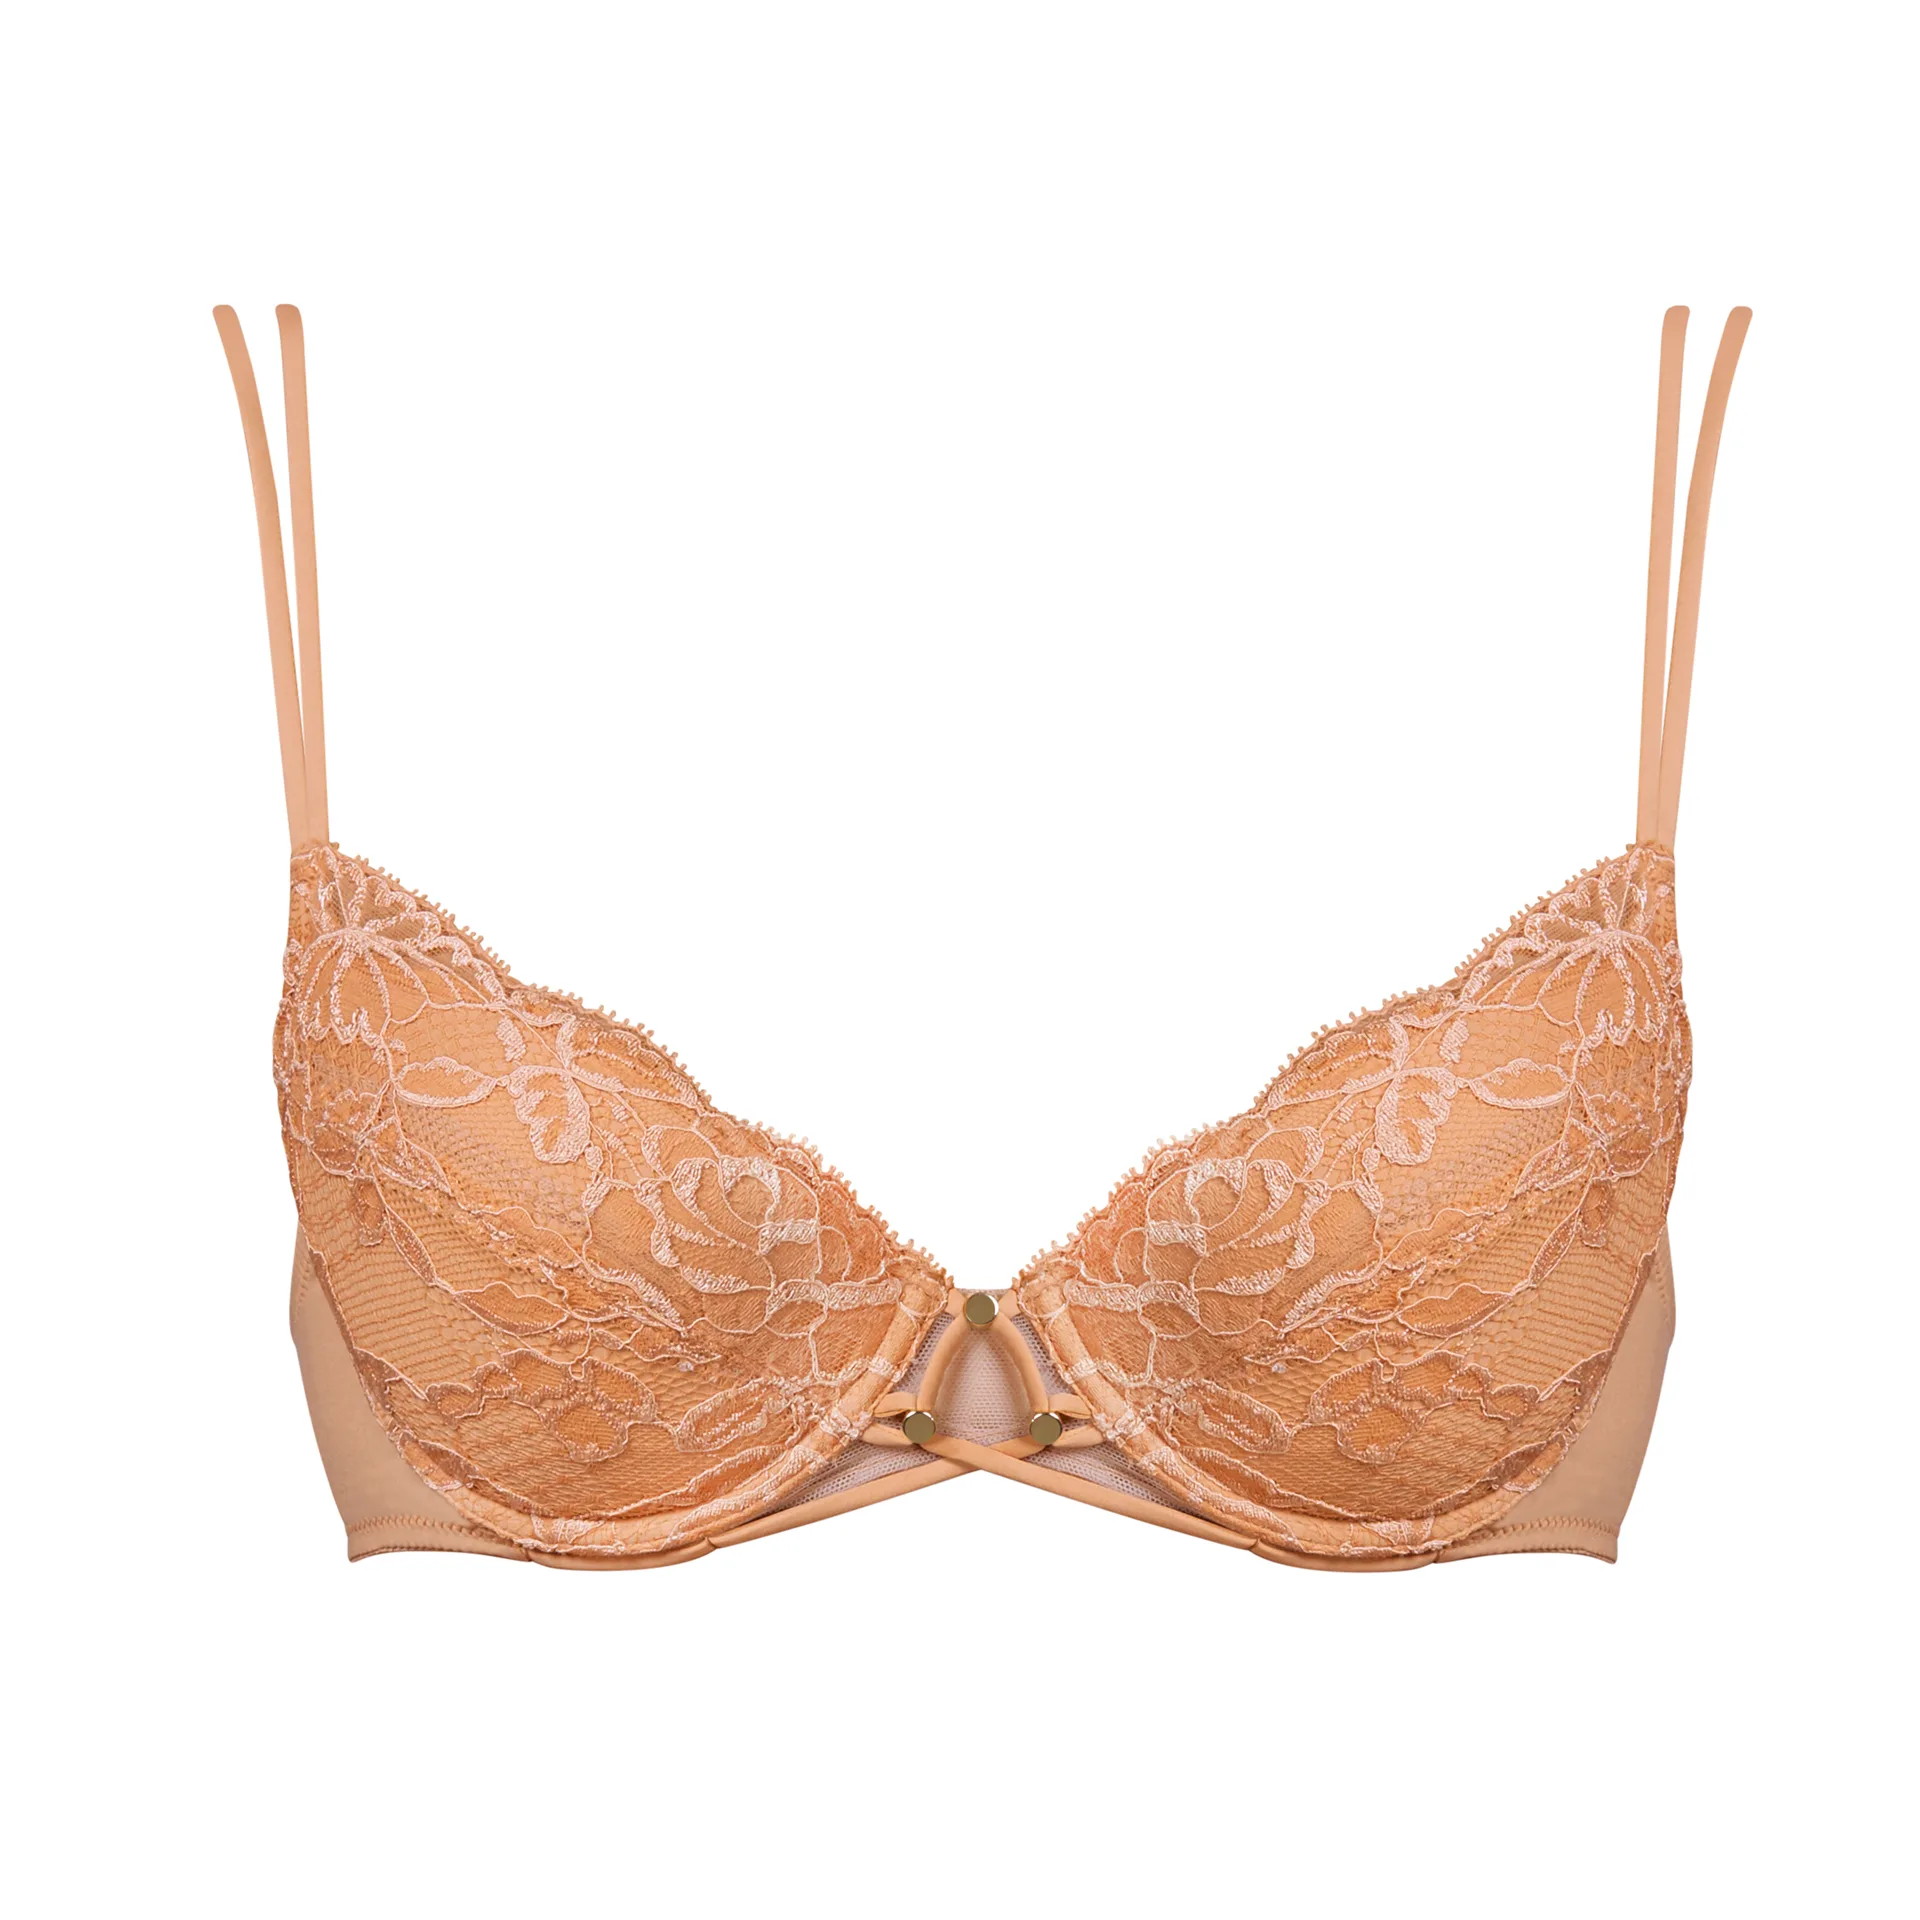 Andres Sarda EVE Golden apple push-up bra removable pads